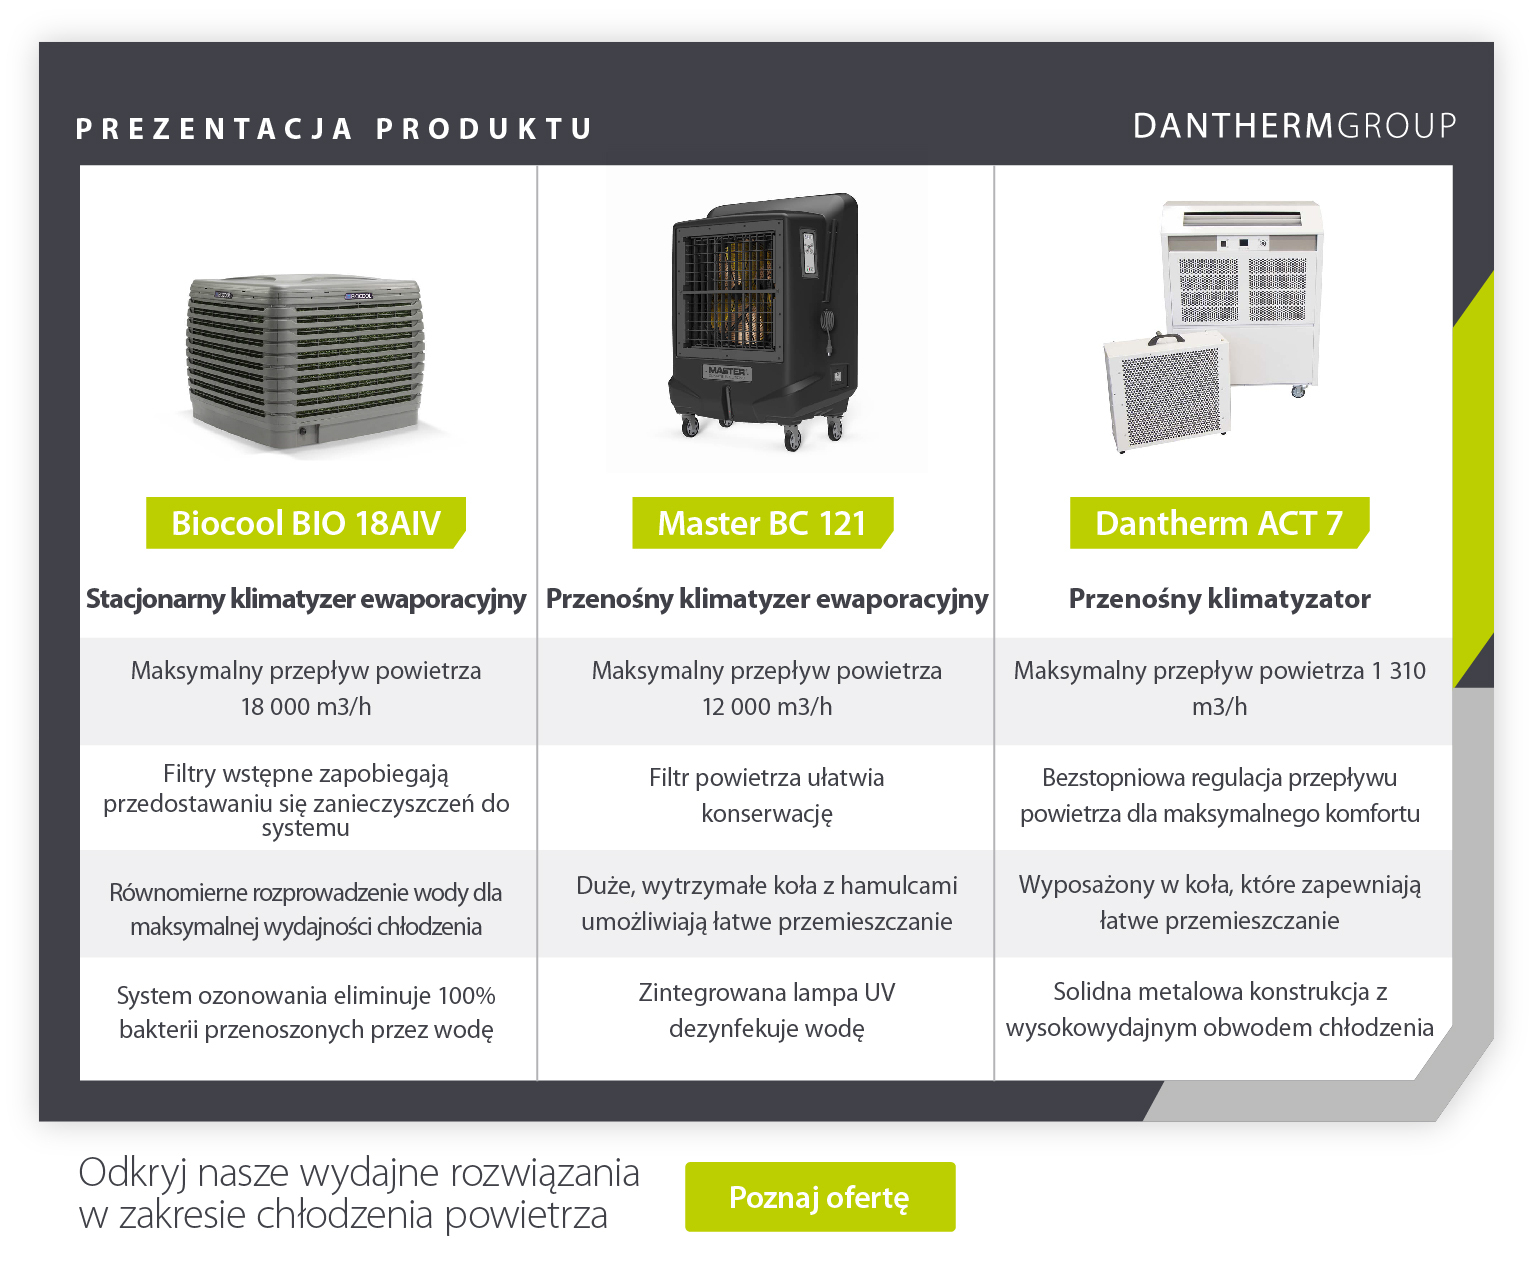 Product showcase comparing 3 commercial evaporative cooler models